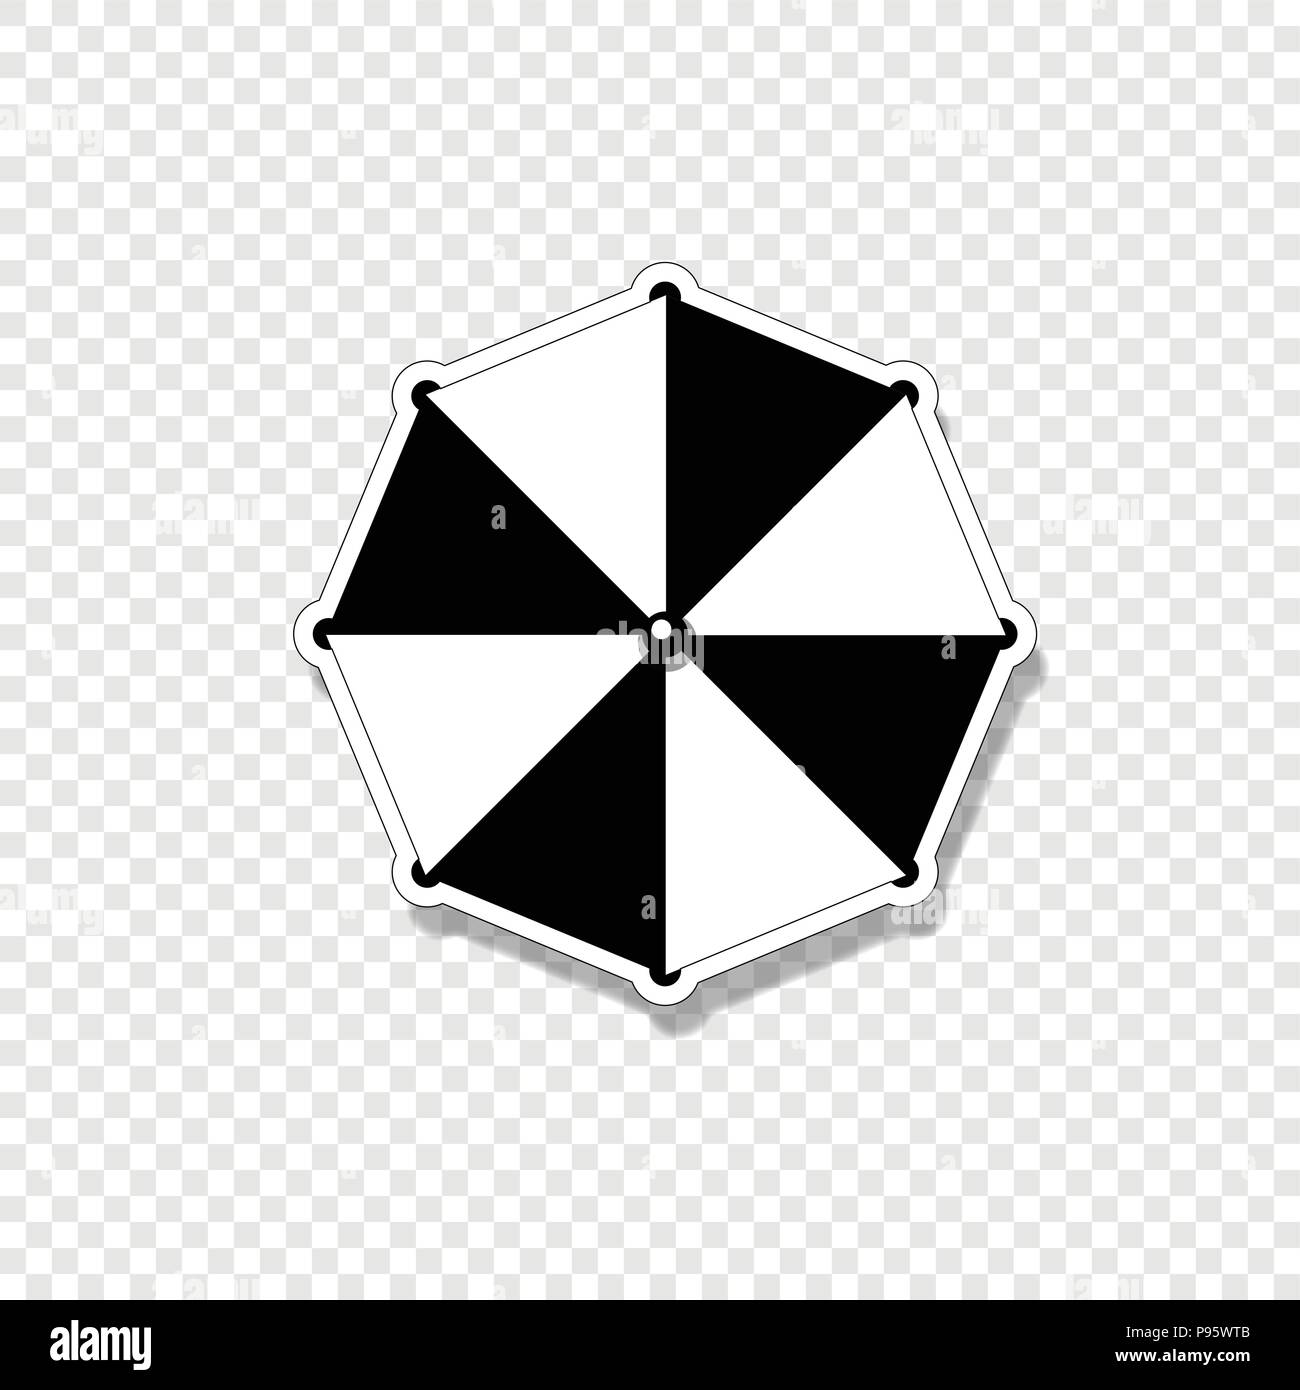 Vector black and white silhouette illustration of beach striped umbrella top view icon isolated on transparent background. Stock Vector